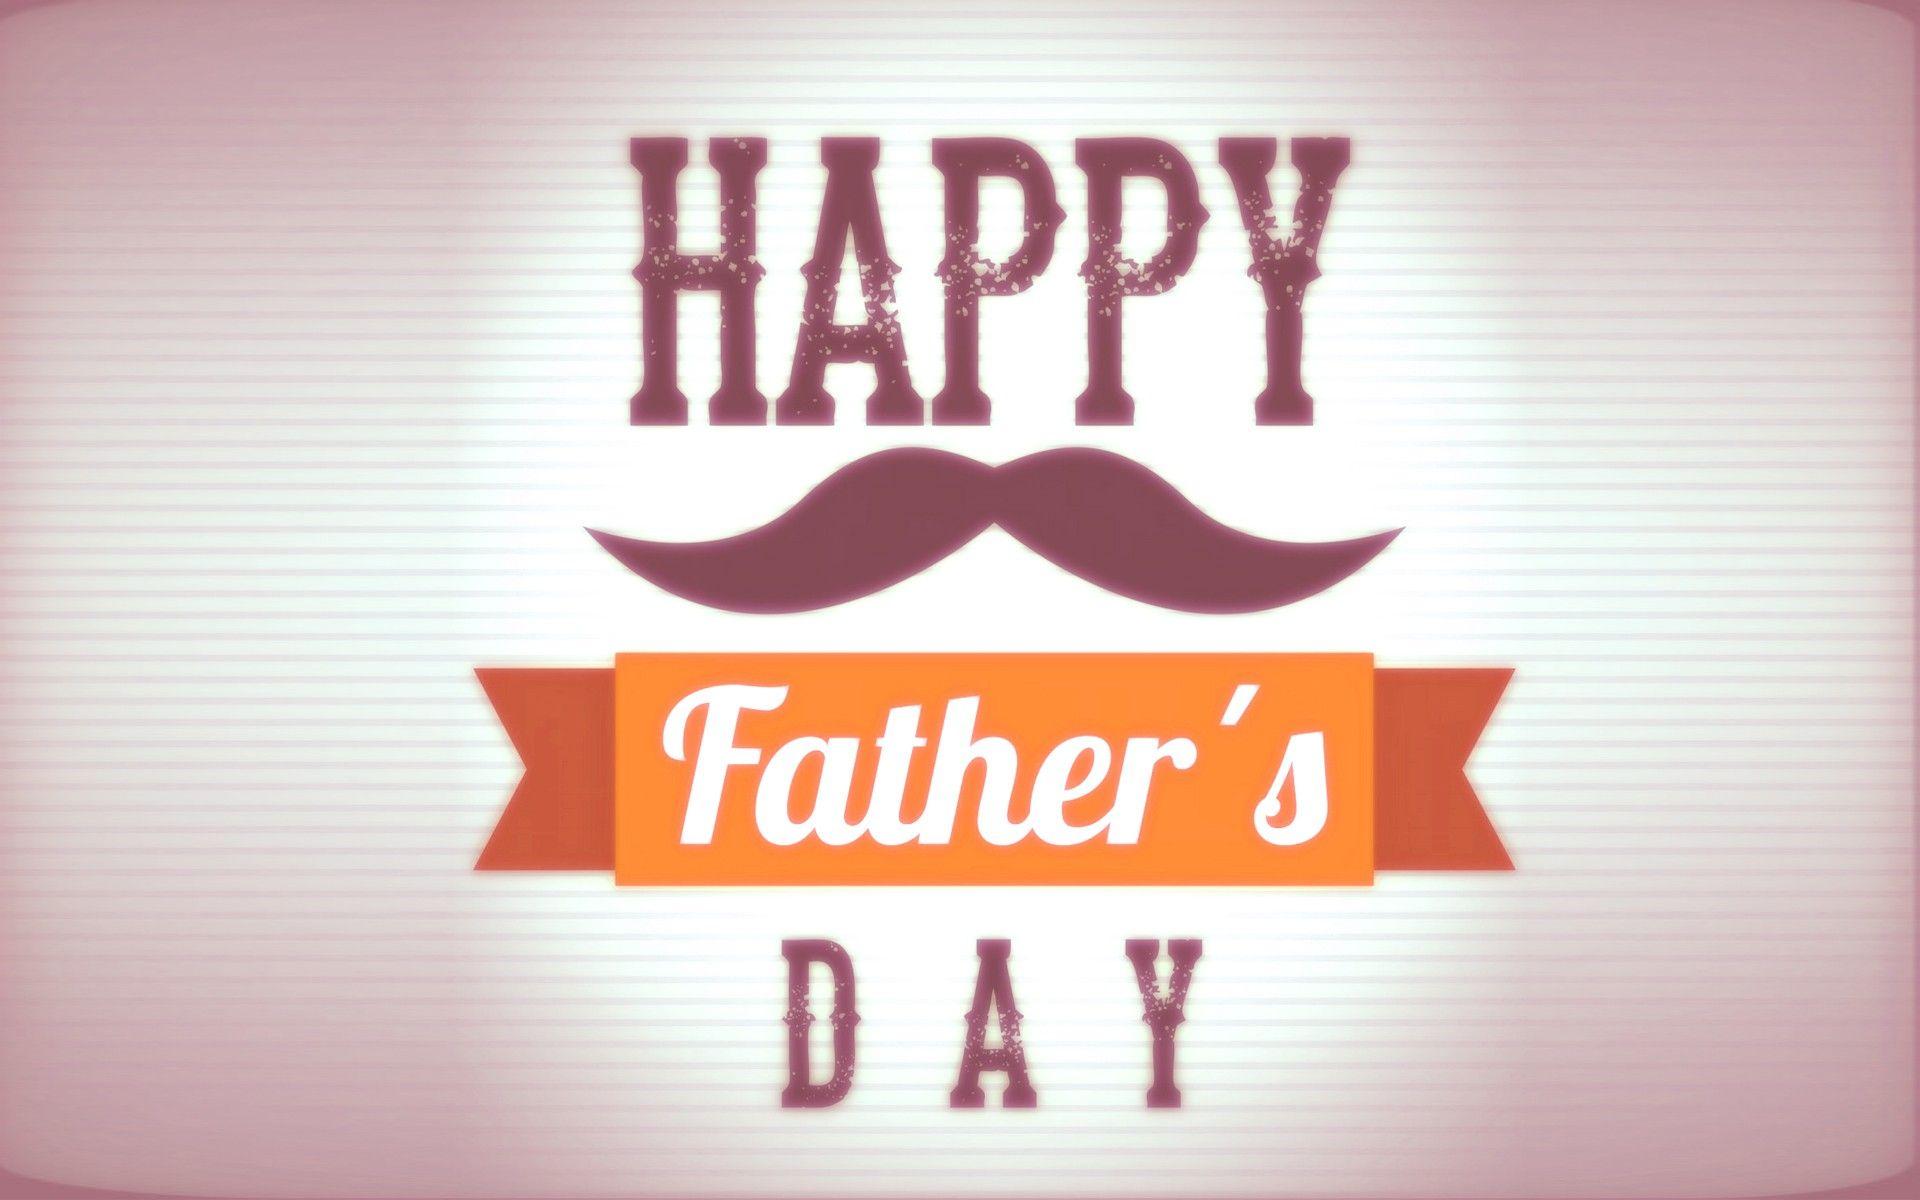 Happy Fathers Day Image, Photo, Picture, HD Wallpaper Free 2018